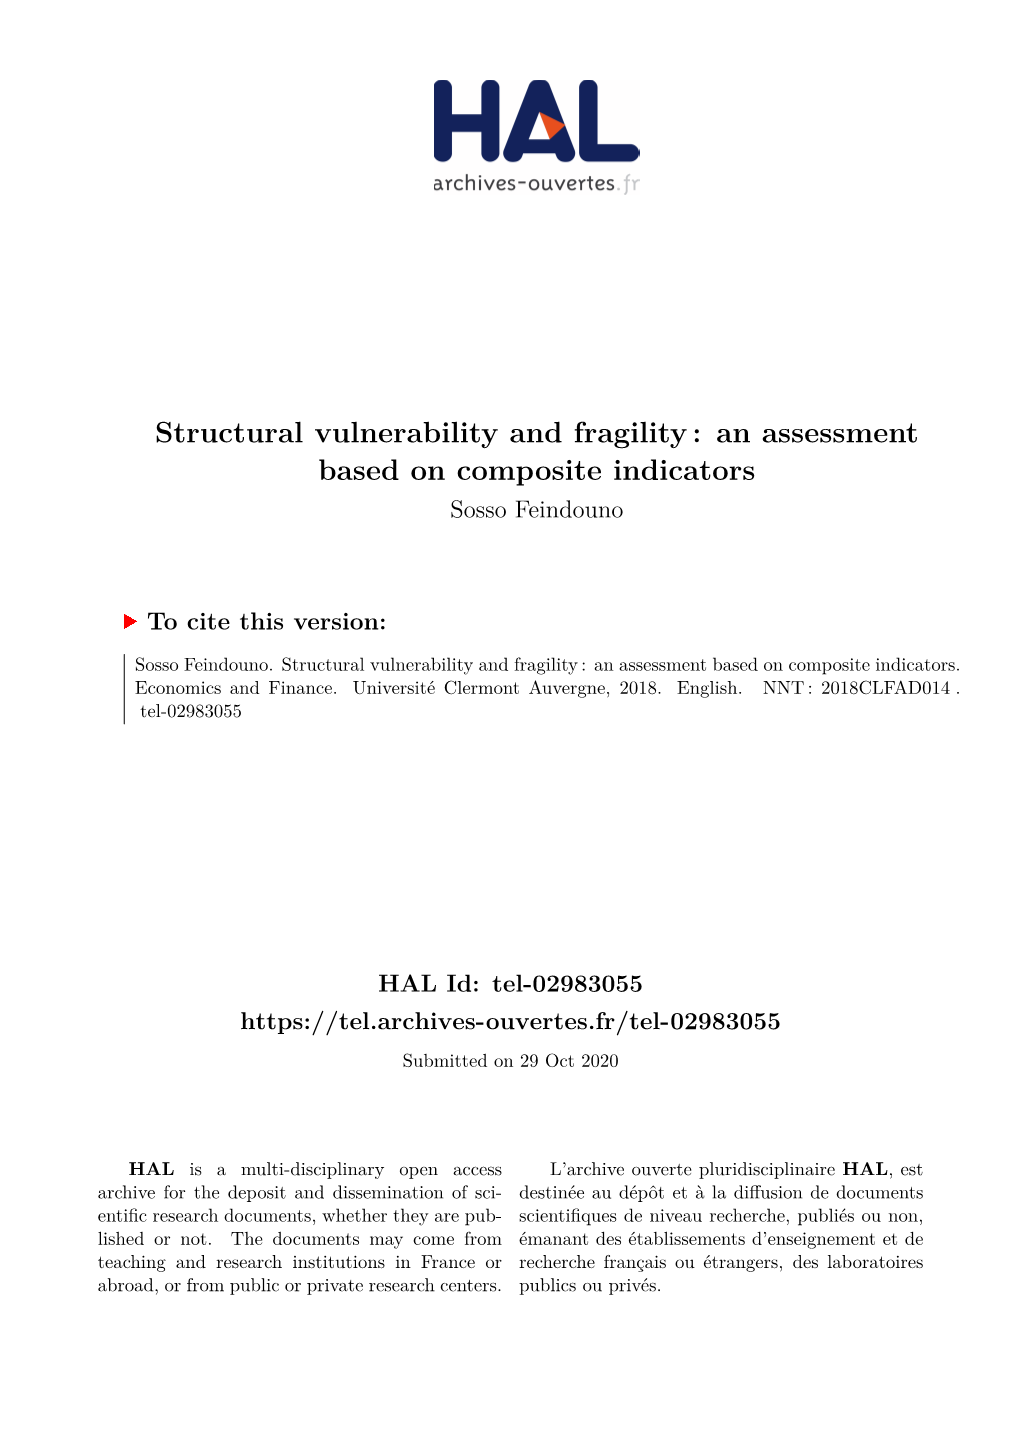 Structural Vulnerability and Fragility: an Assessment Based on Composite Indicators